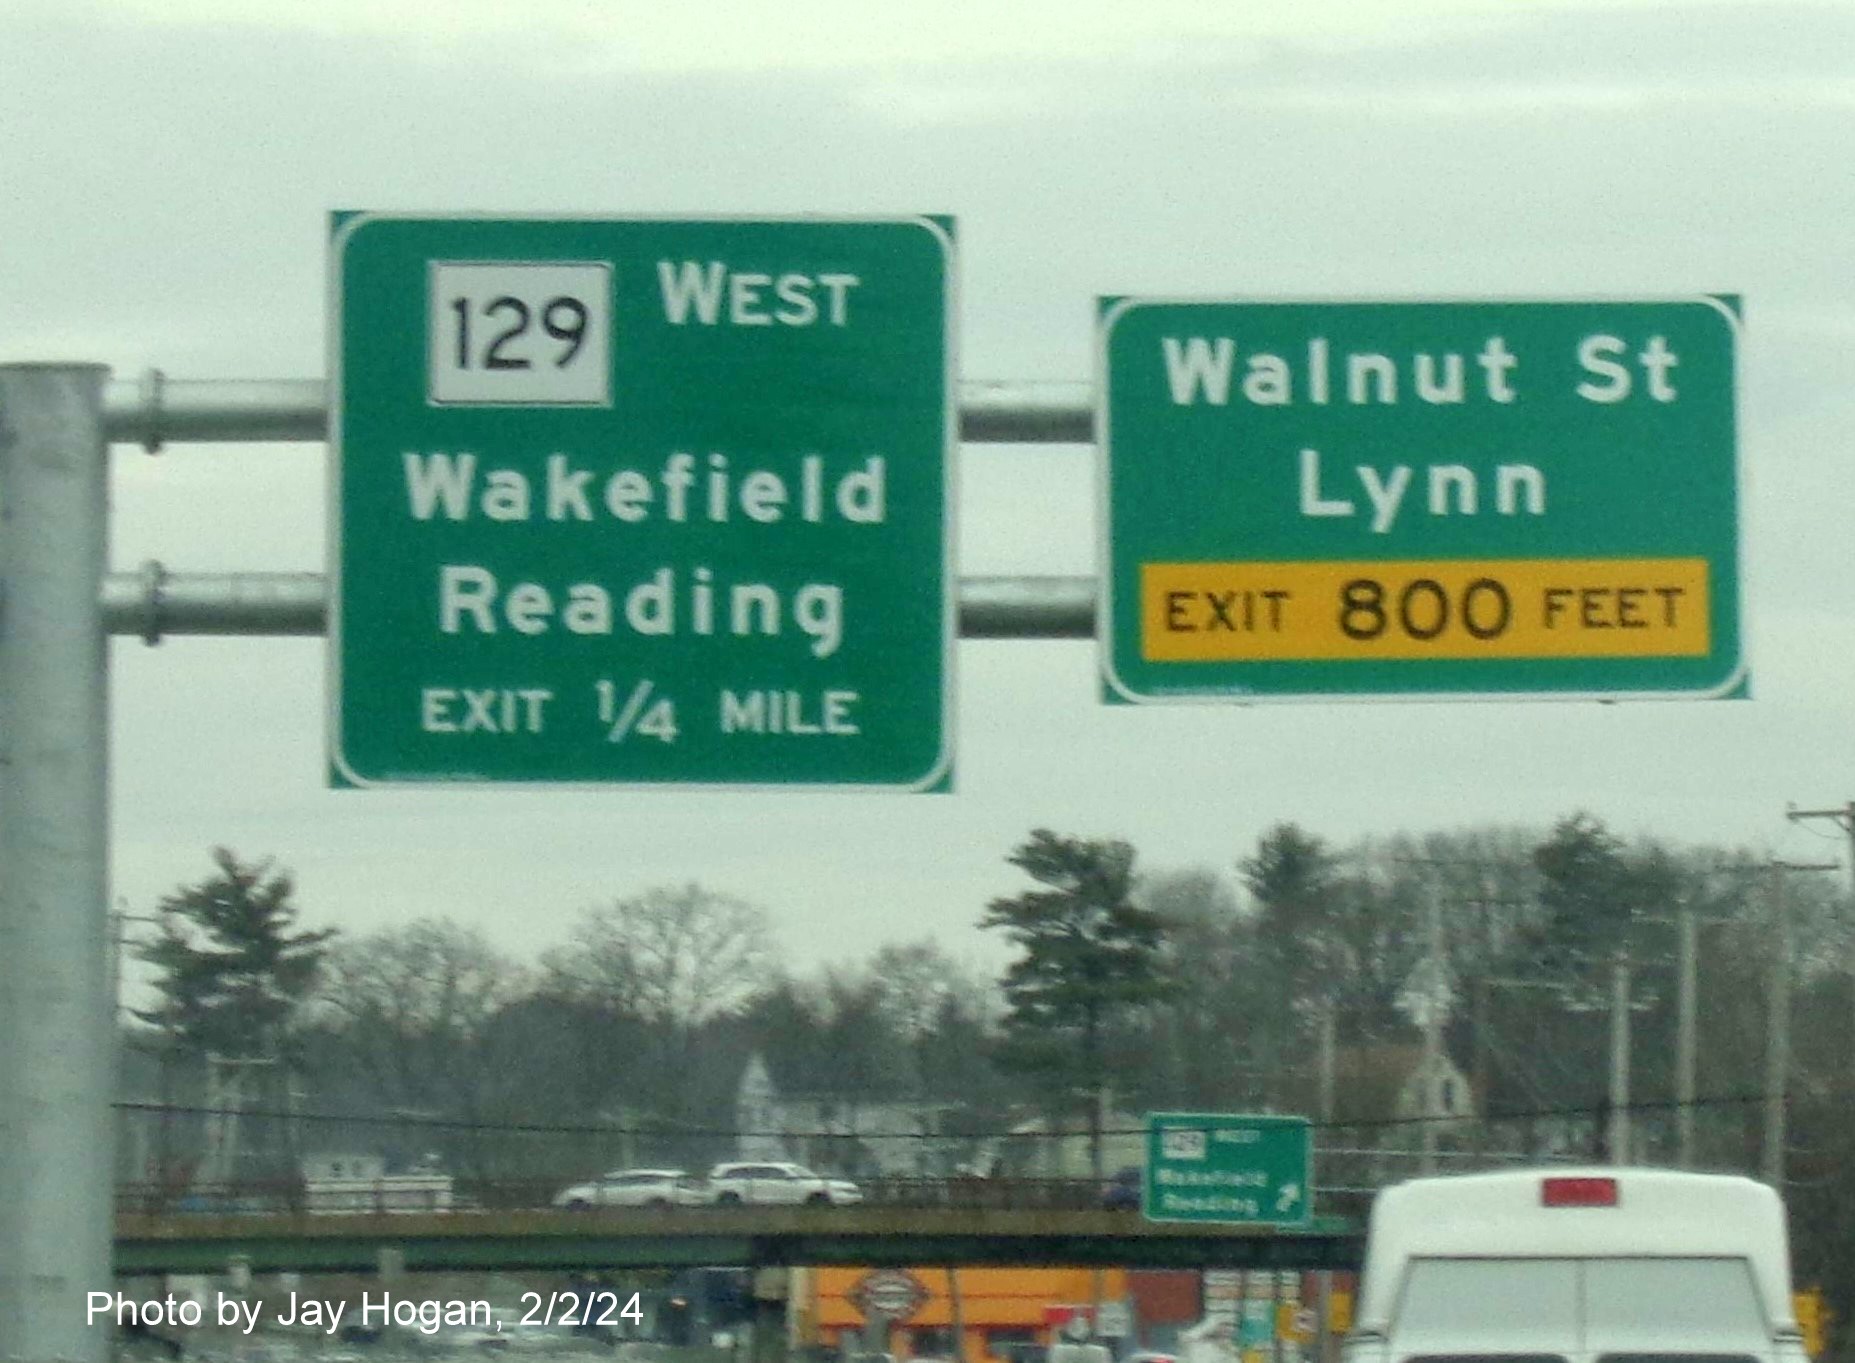 Image of recently placed overhead advance signage approaching Walnut Street ramp on US 1 North in Saugus, by Kevin Manfra, February 2024